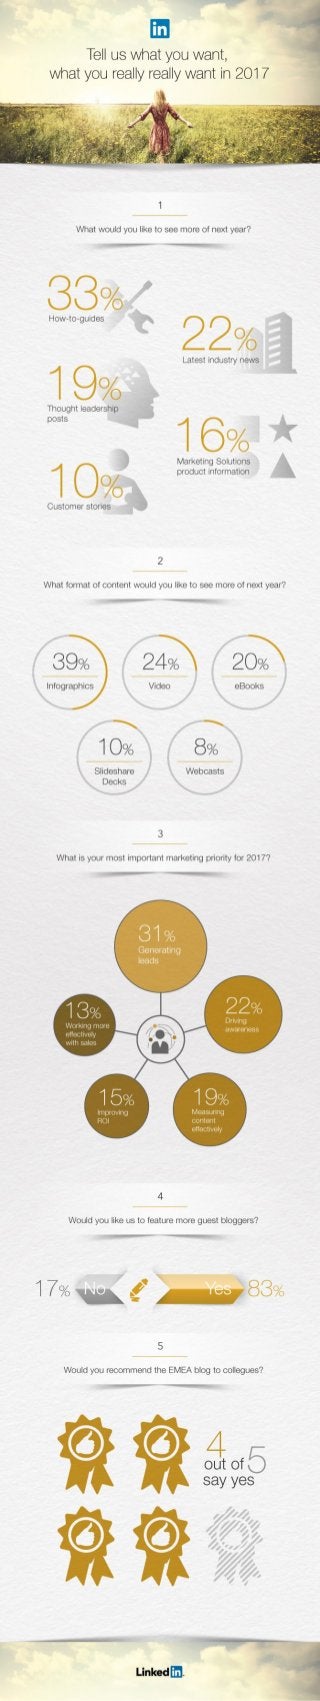 Tell us want you want, what you really, really want 2017 - Survey Results